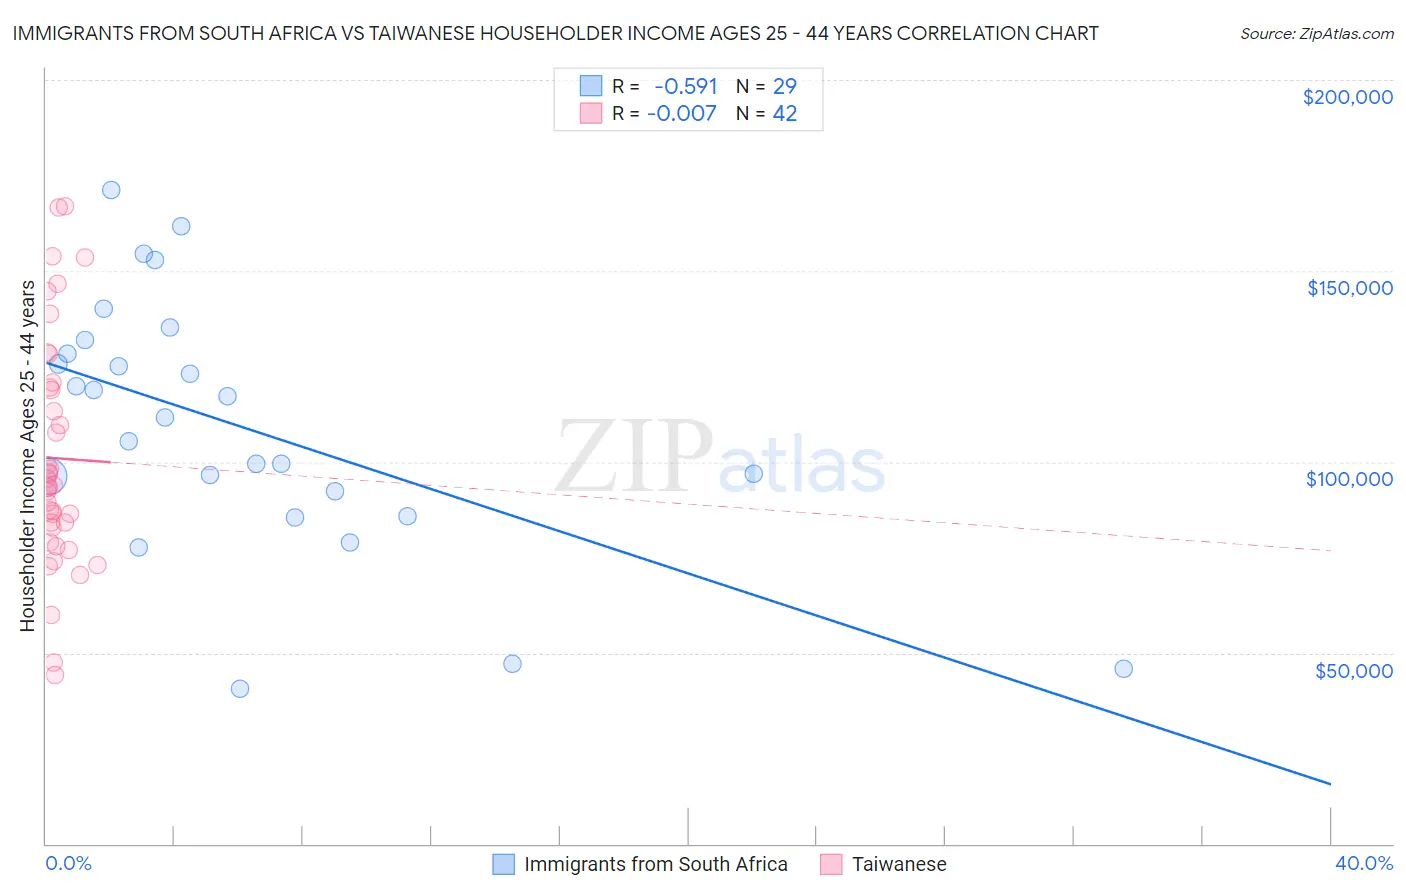 Immigrants from South Africa vs Taiwanese Householder Income Ages 25 - 44 years